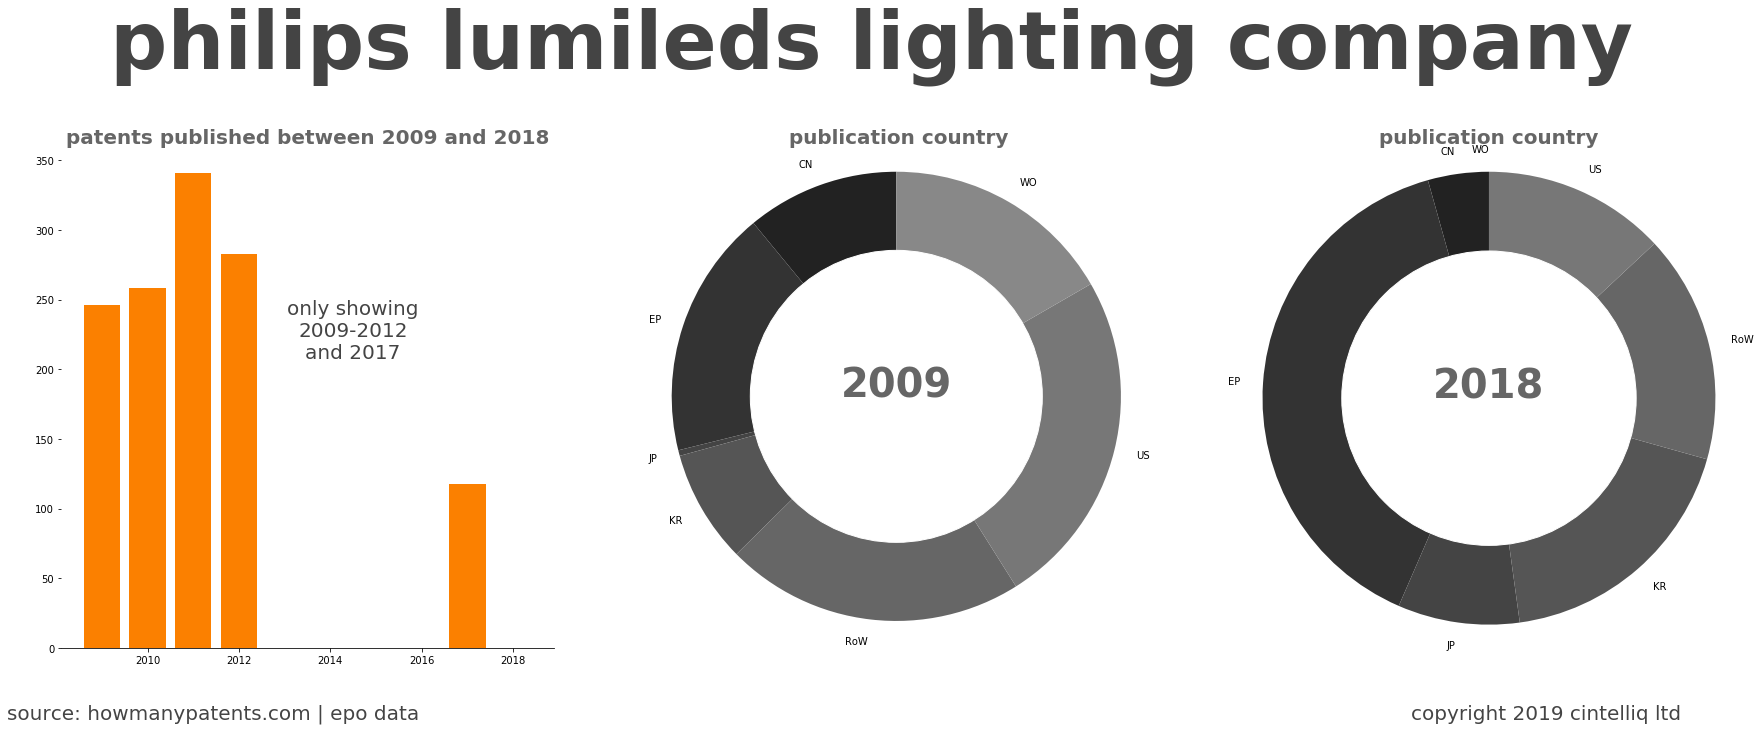 summary of patents for Philips Lumileds Lighting Company